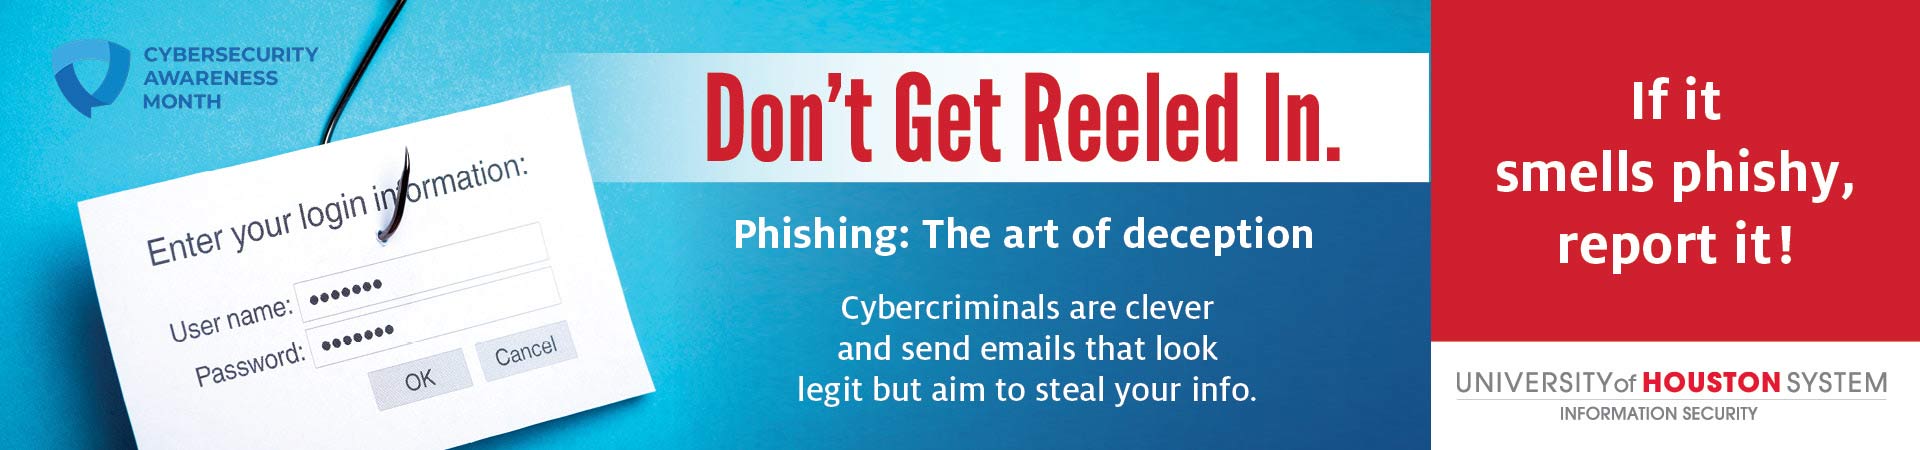 Phishing: Don't get reeled in